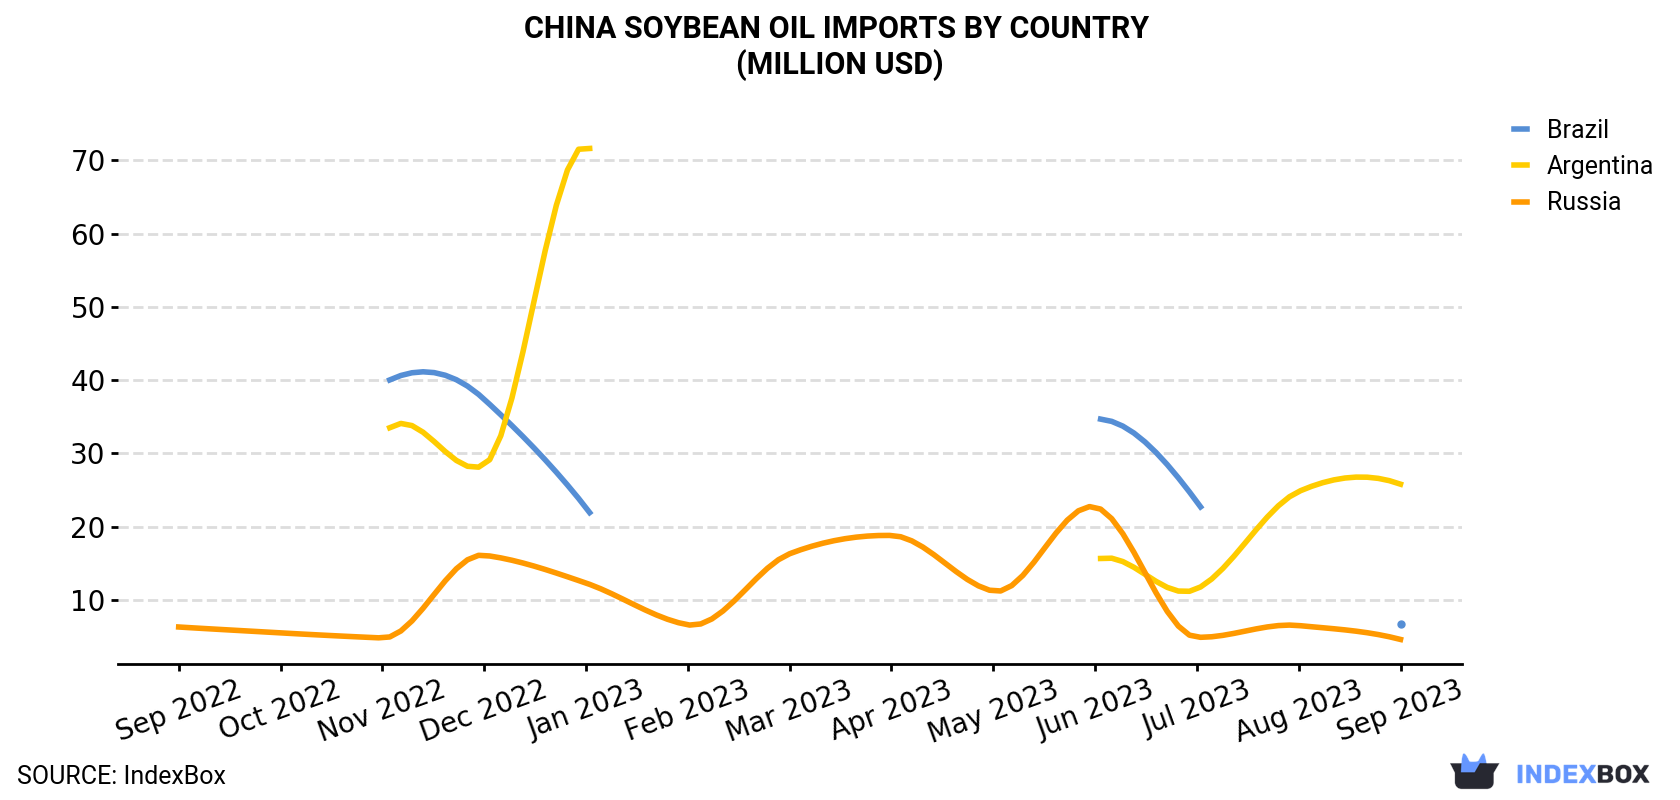 China Soybean Oil Imports By Country (Million USD)